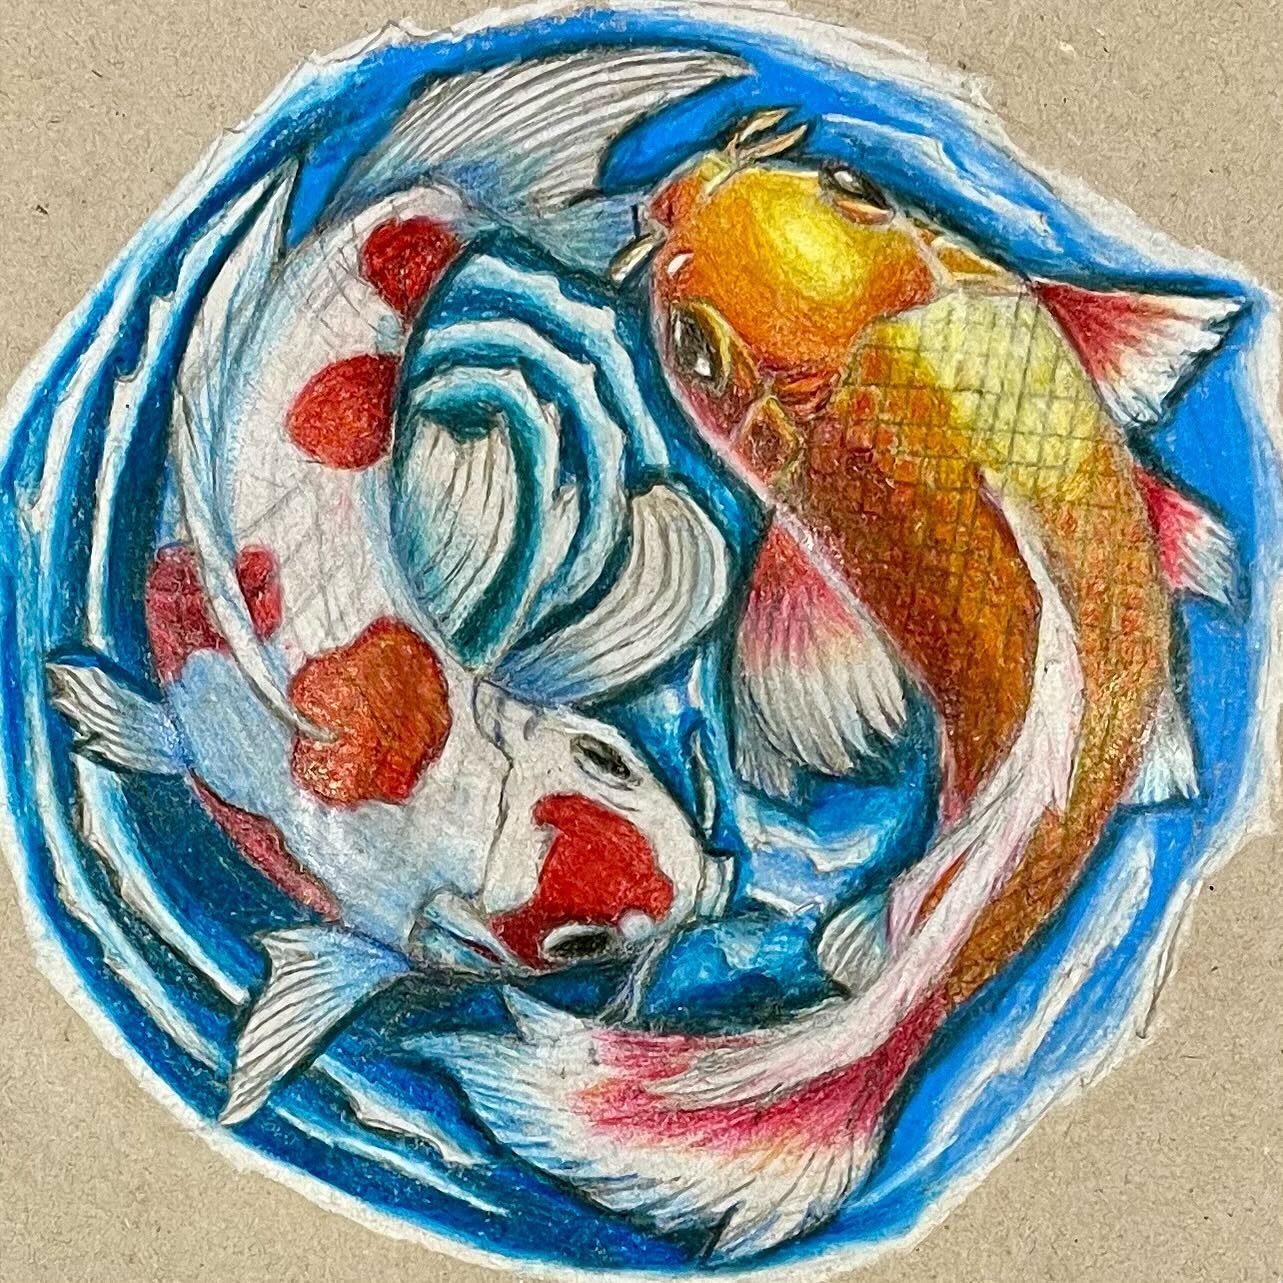 This incredible #koifish #yinyangkoi drawing was made by grade 7 artist Erica W. Erica used coloured pencils coupled with lots of time and effort to create this lifelike drawing. #pencilcrayons are often overlooked as a drawing medium, but can delive